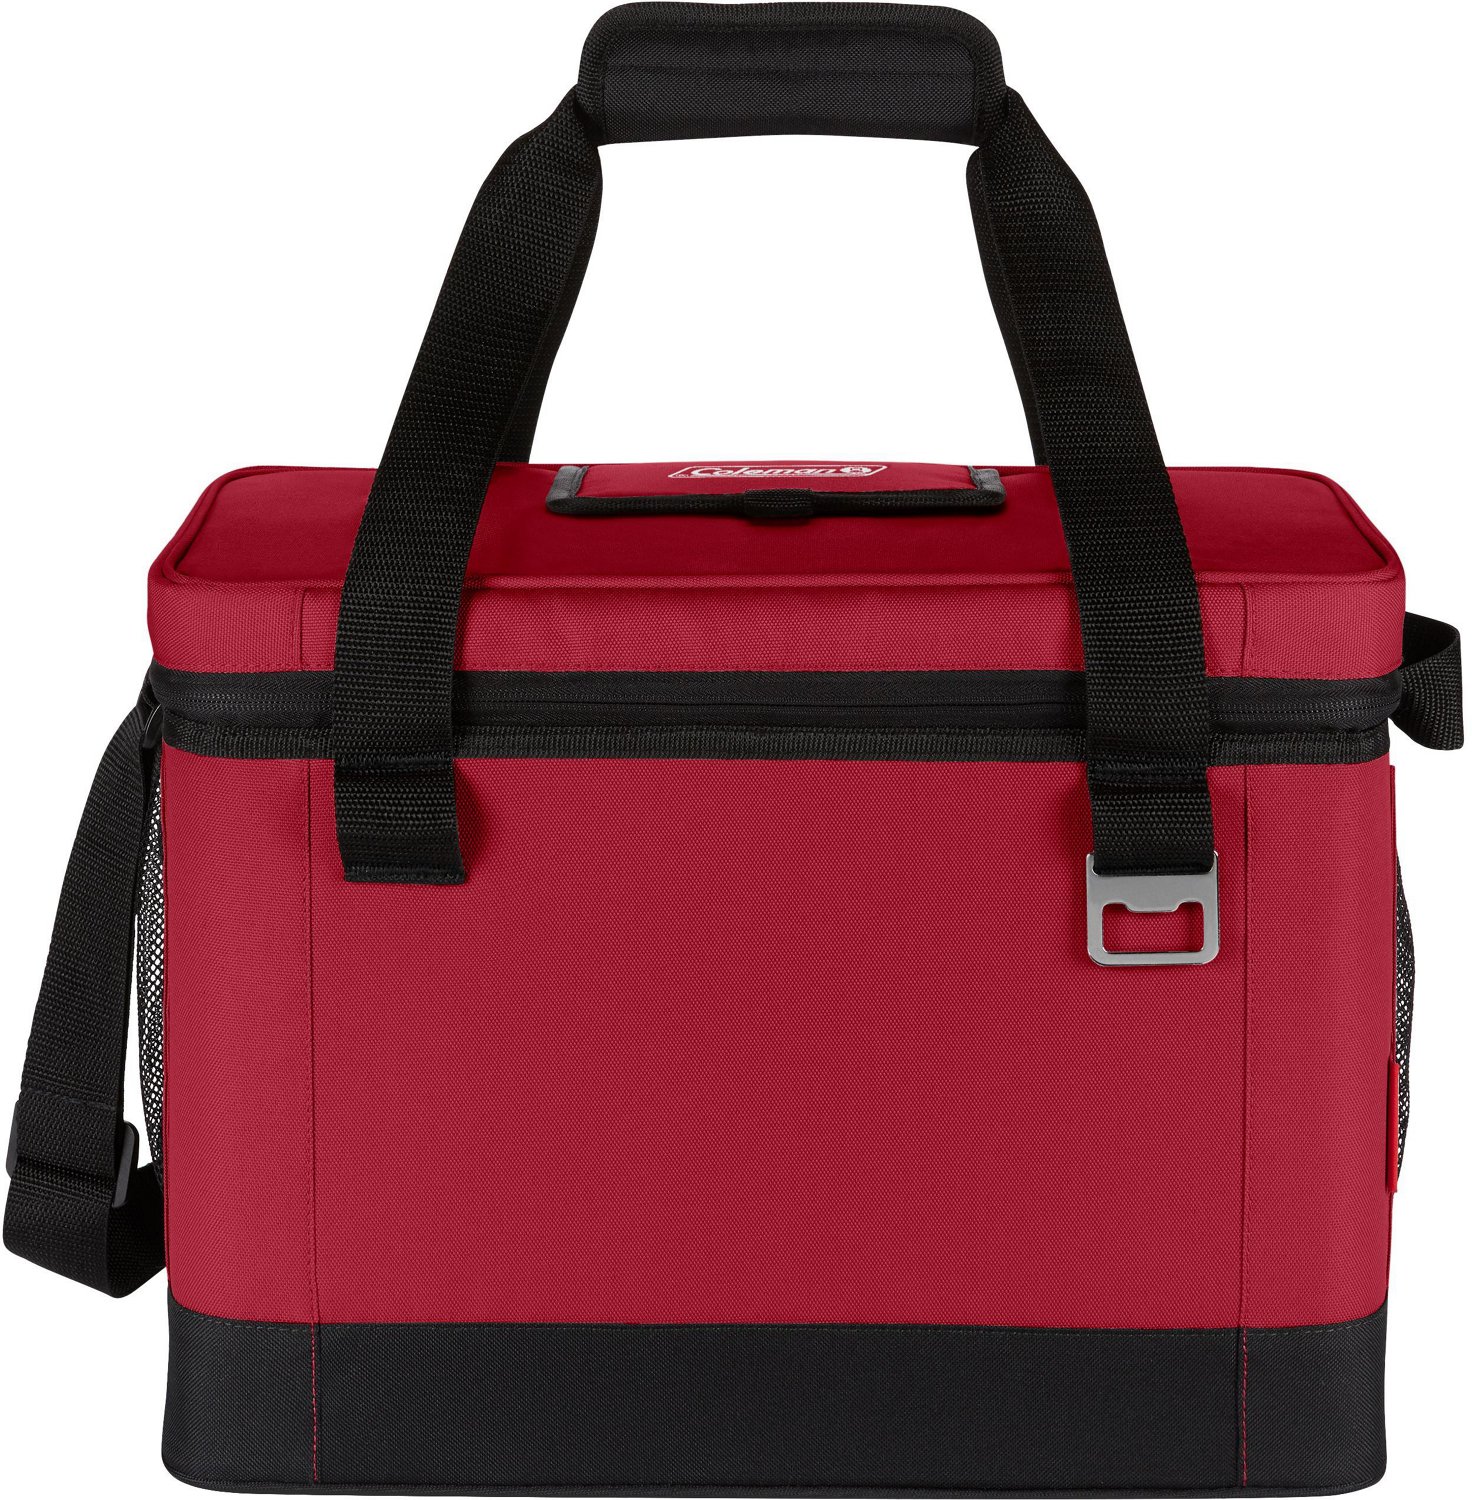 COLEMAN SOFT COOLER - 30 CAN | Free Shipping at Academy